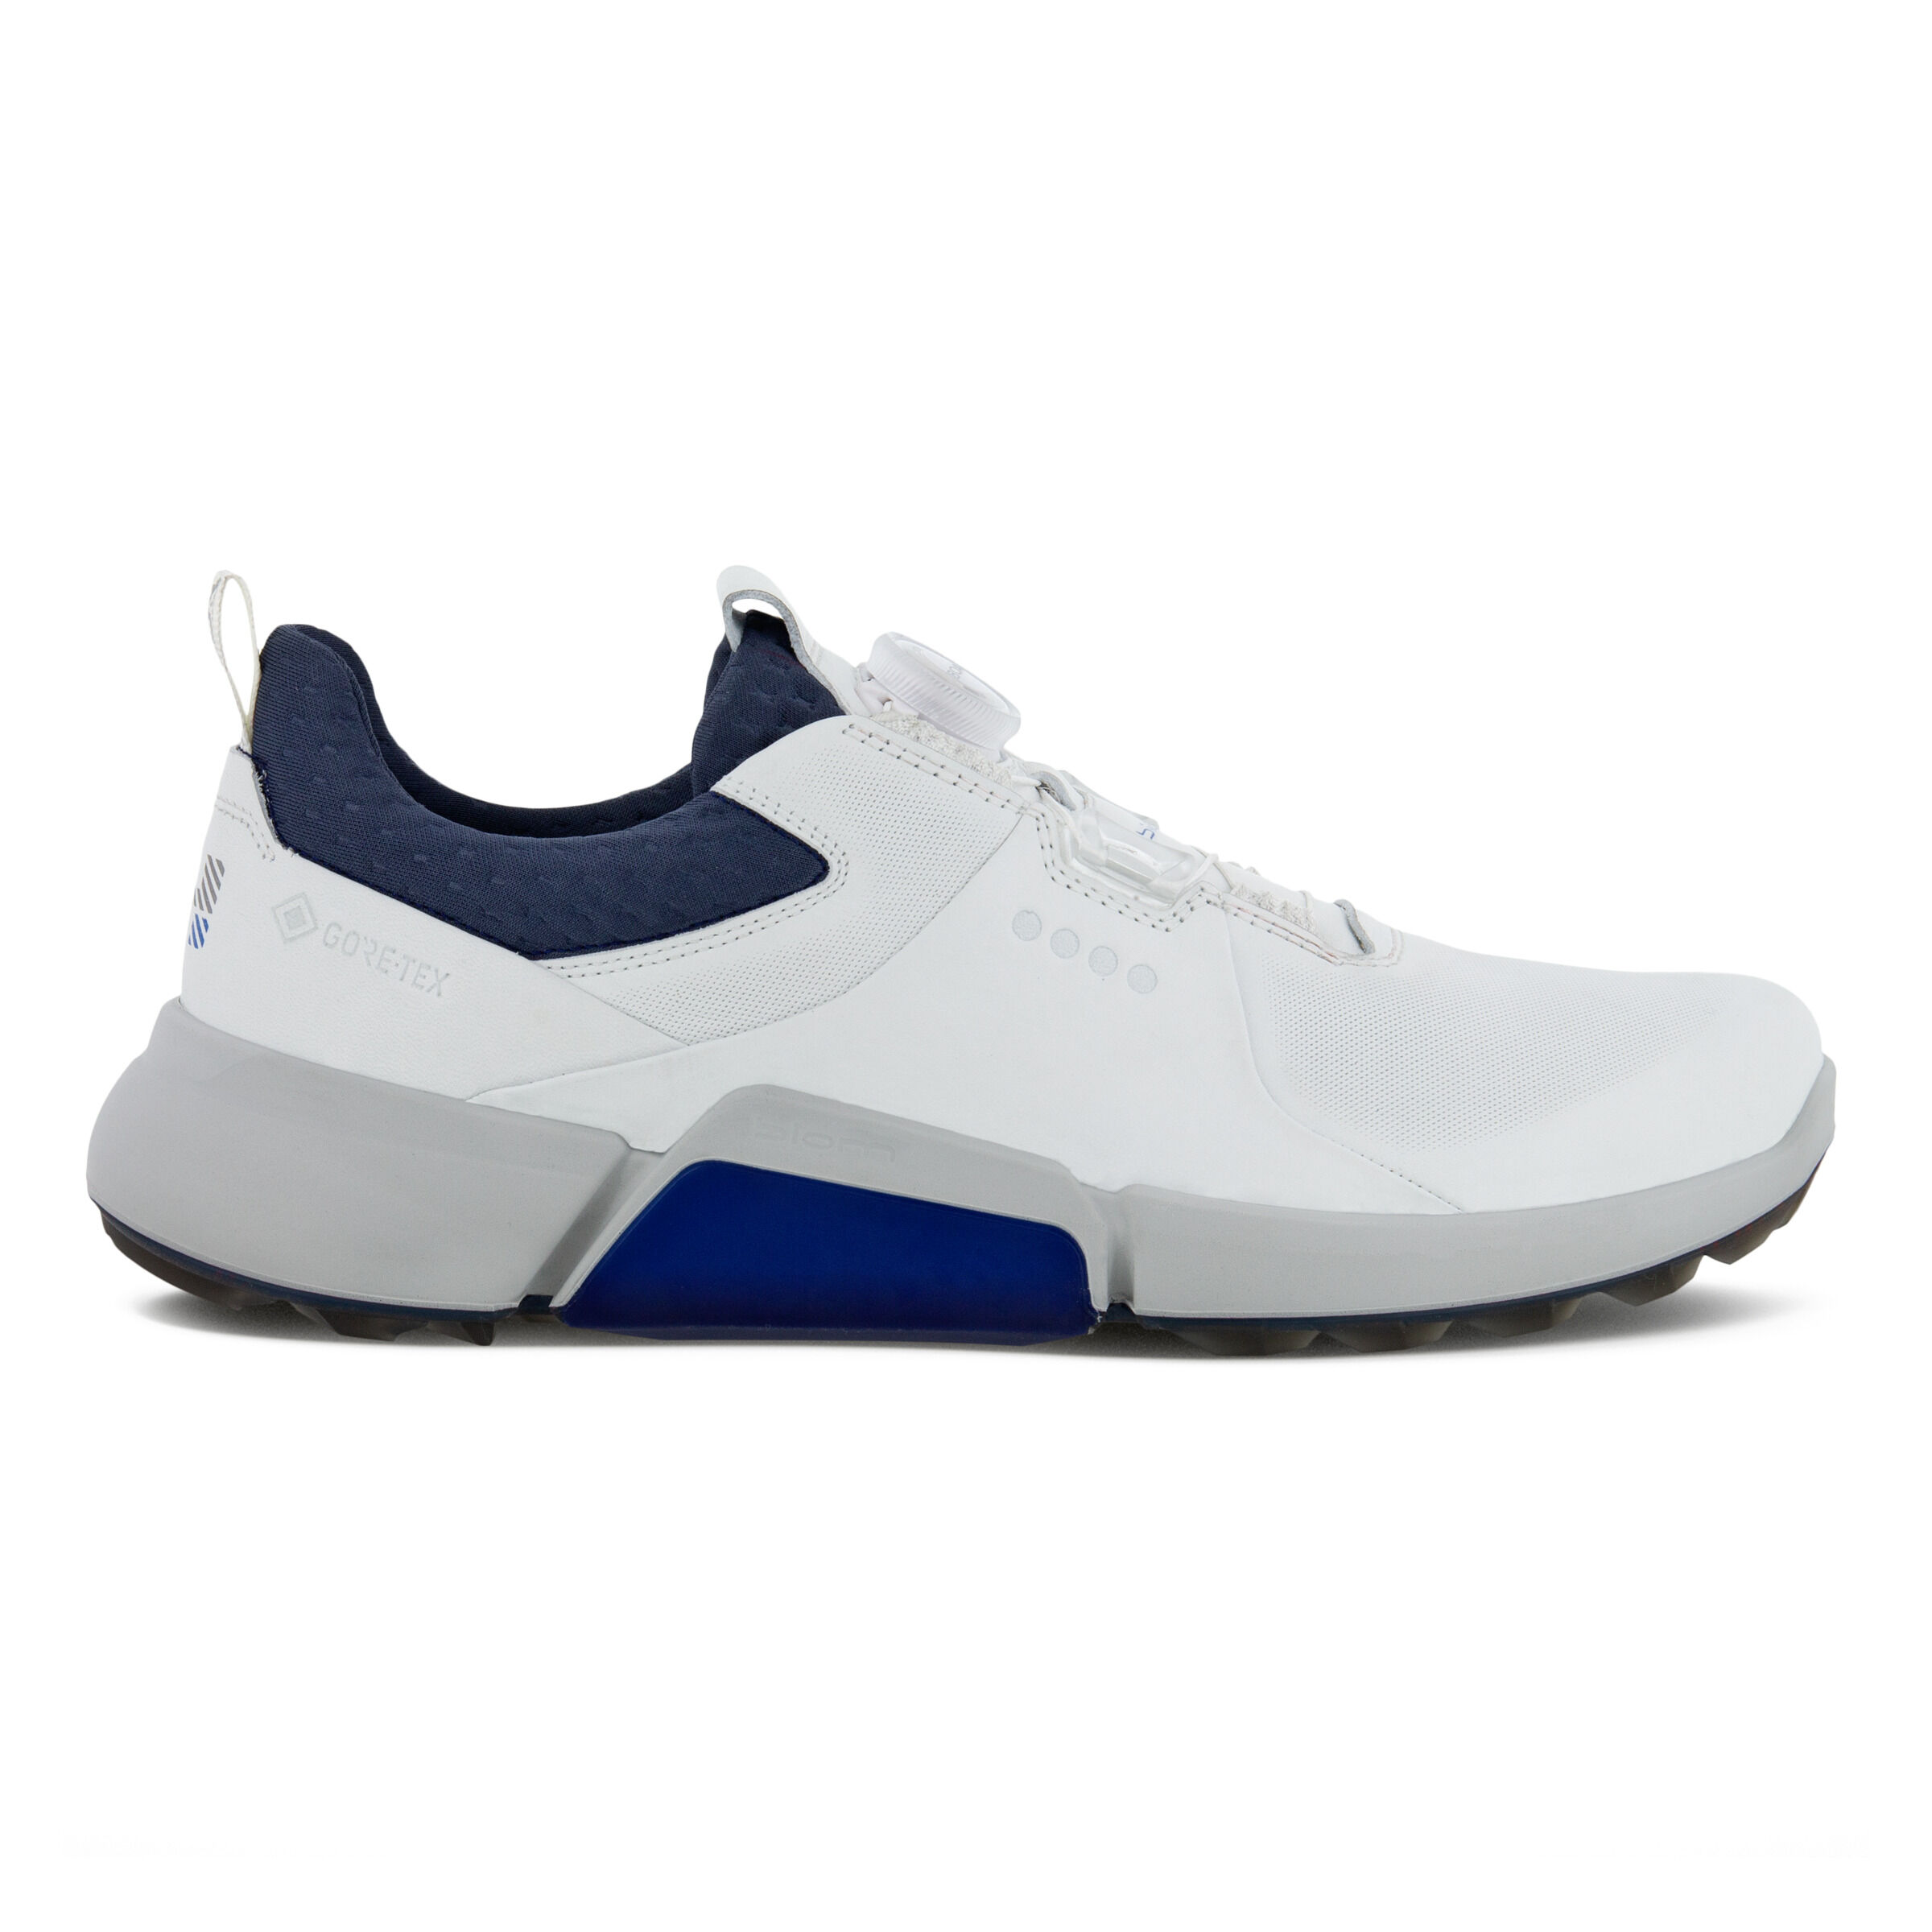 Foran invadere Formen ecco korea Cheap Promotional Products | Low Cost Promotional Products -  Women's & Men's Sneakers & Sports Shoes - Shop Athletic Shoes Online